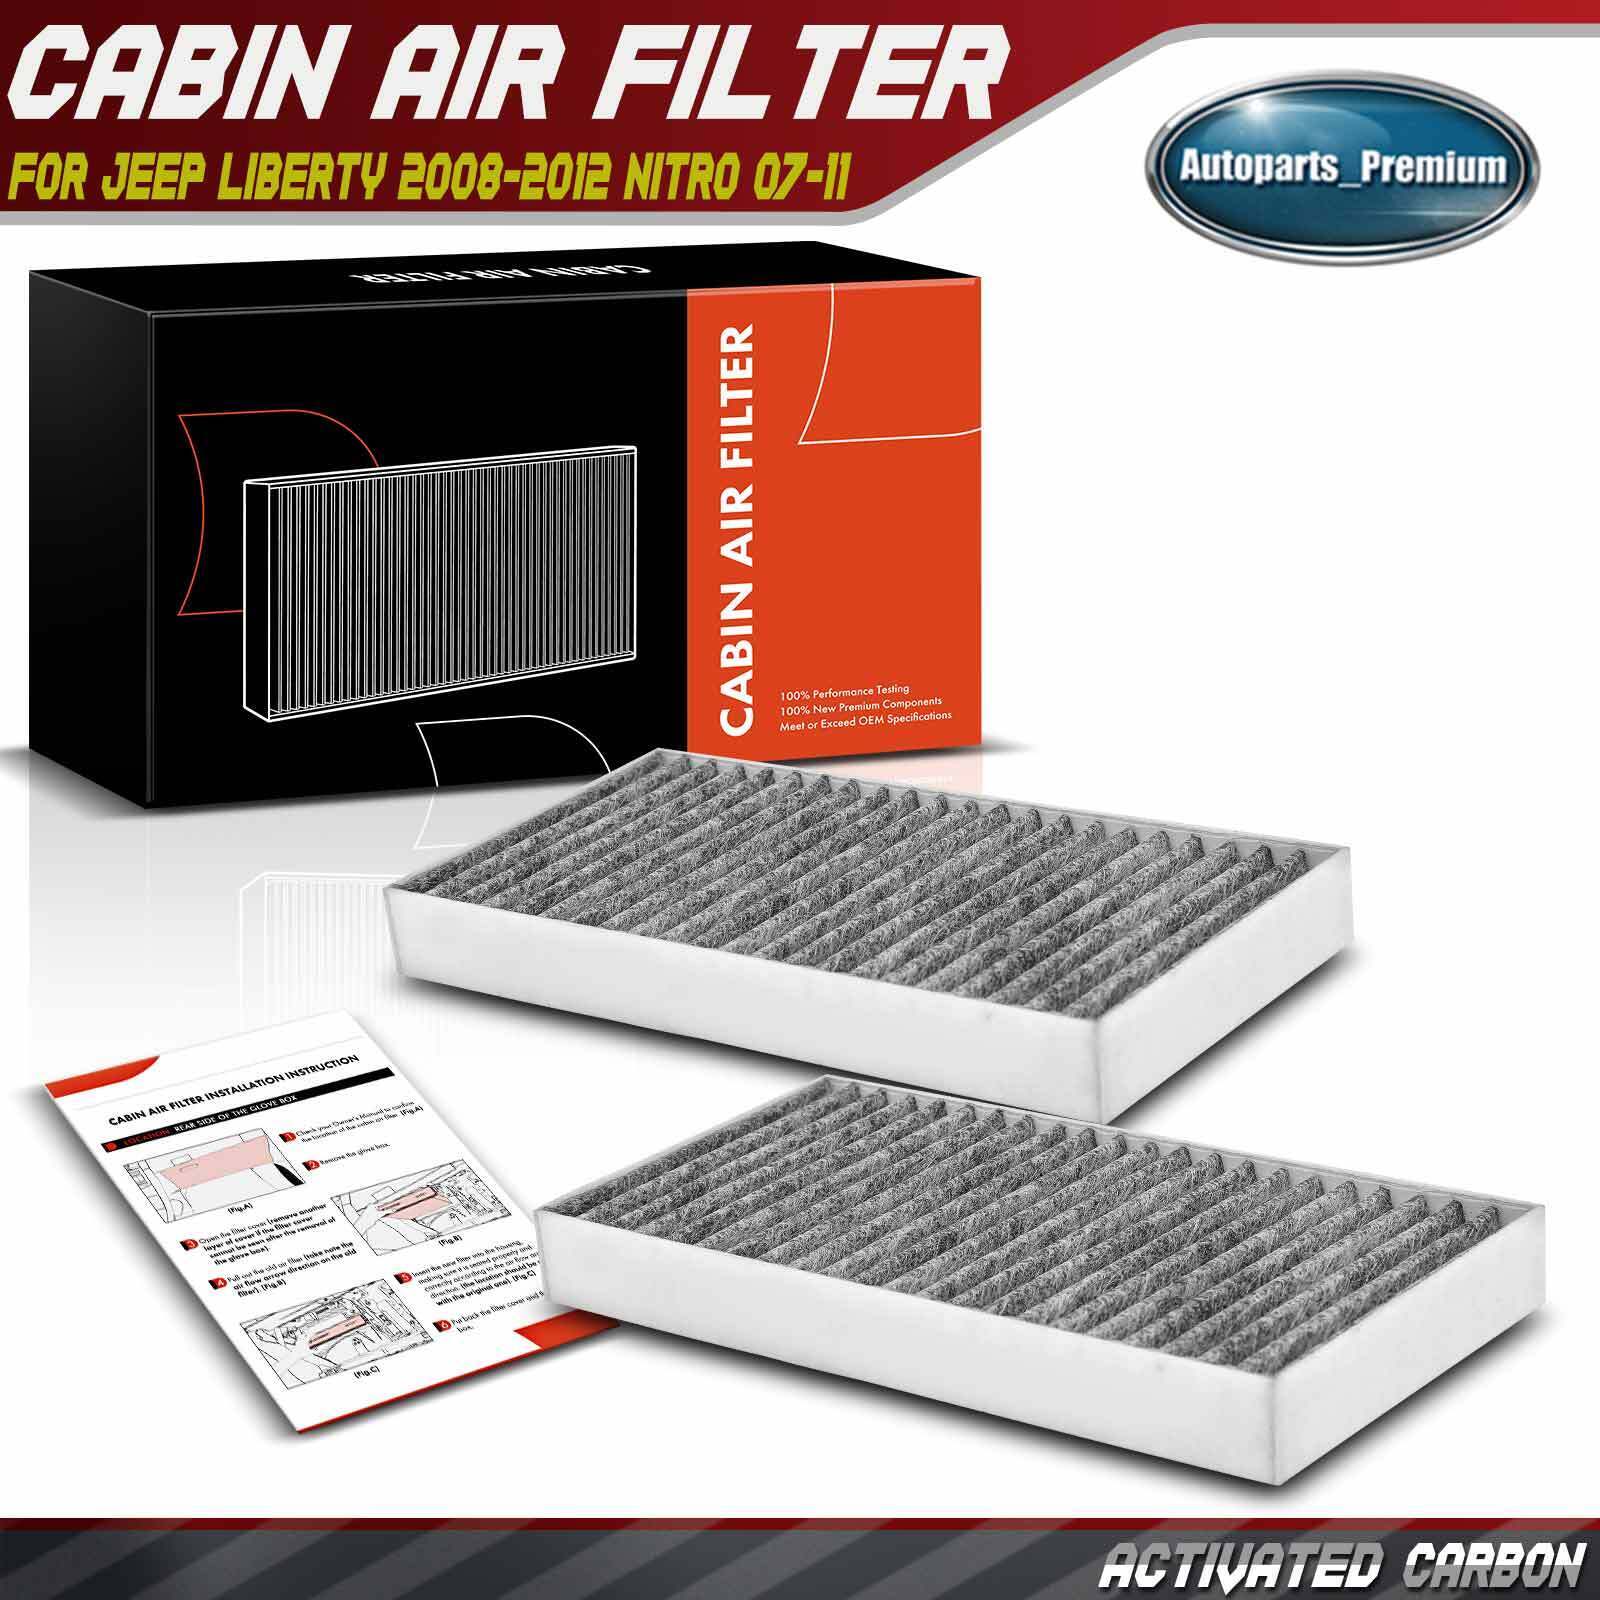 New Activated Carbon Cabin Air Filter for Jeep Liberty 2008-2012 Nitro 2007-2011